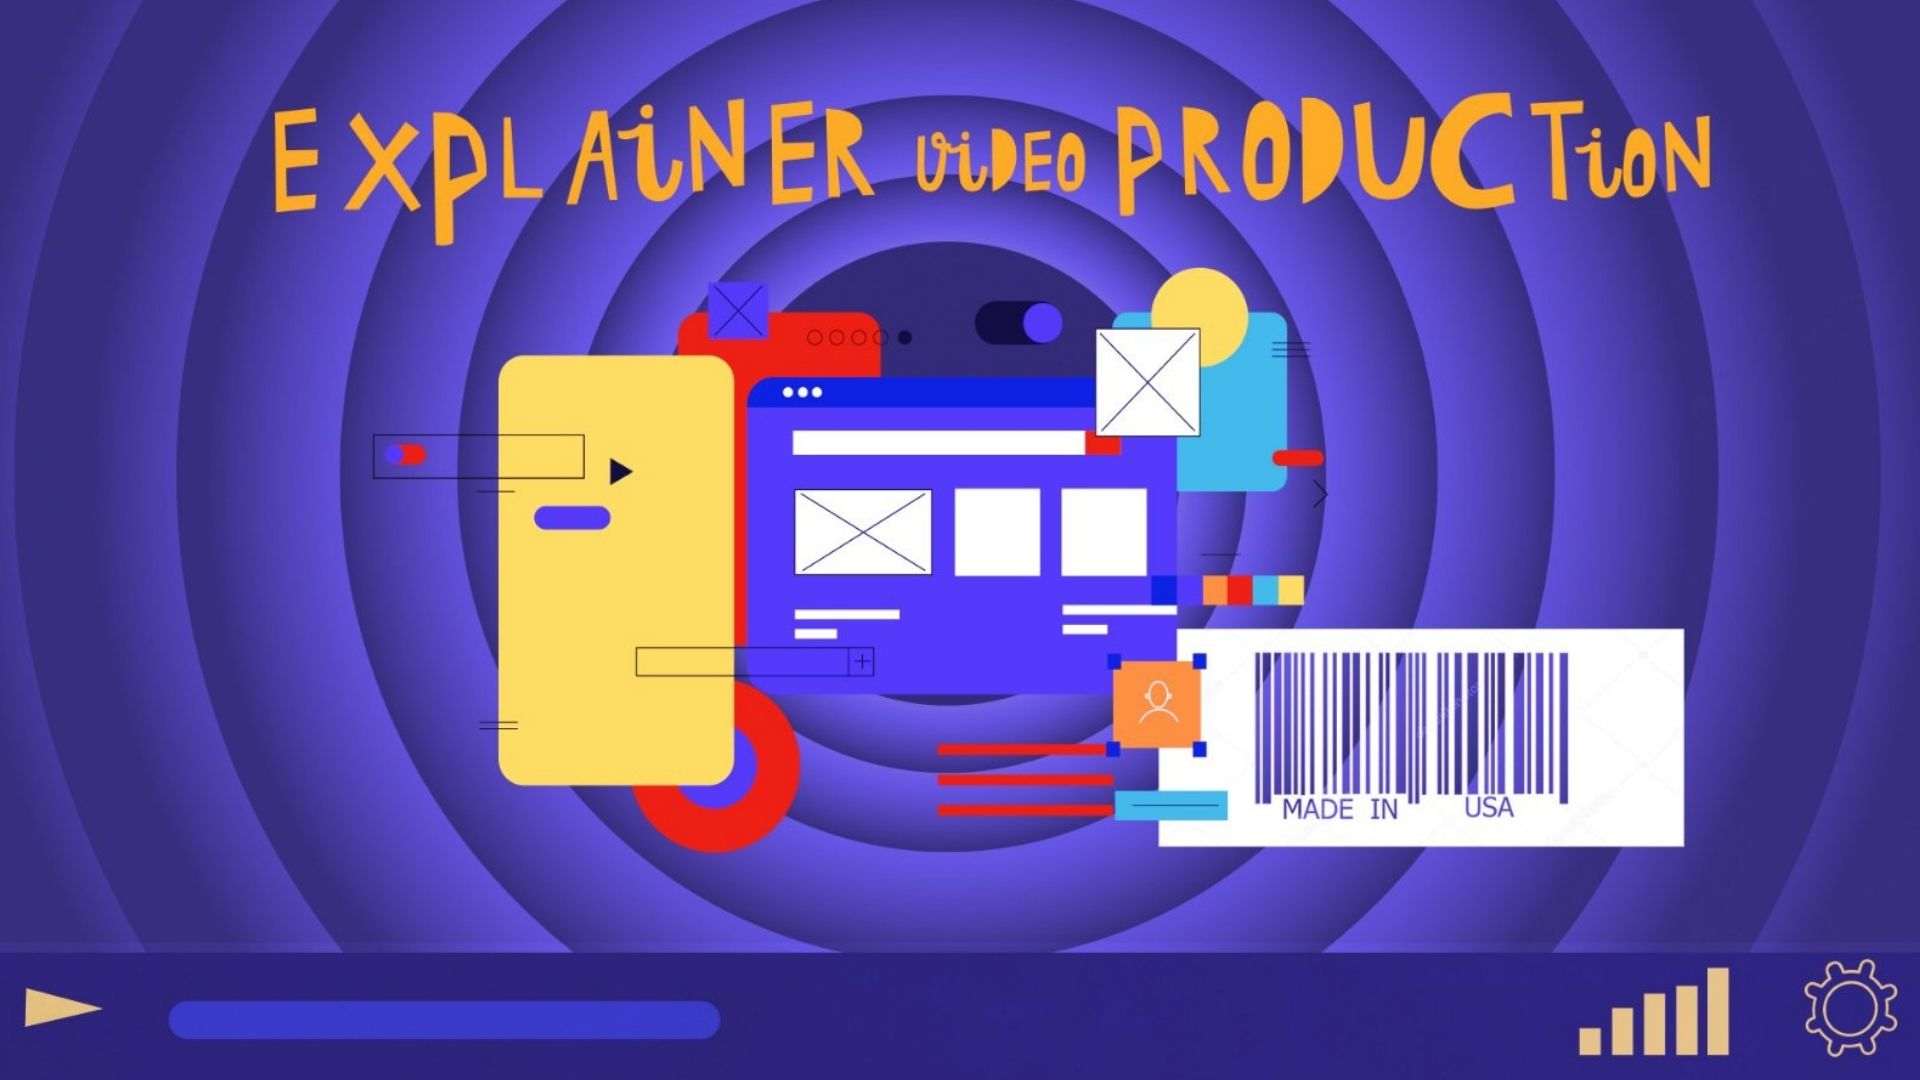 Explainer Video Production Companies in the U.S.